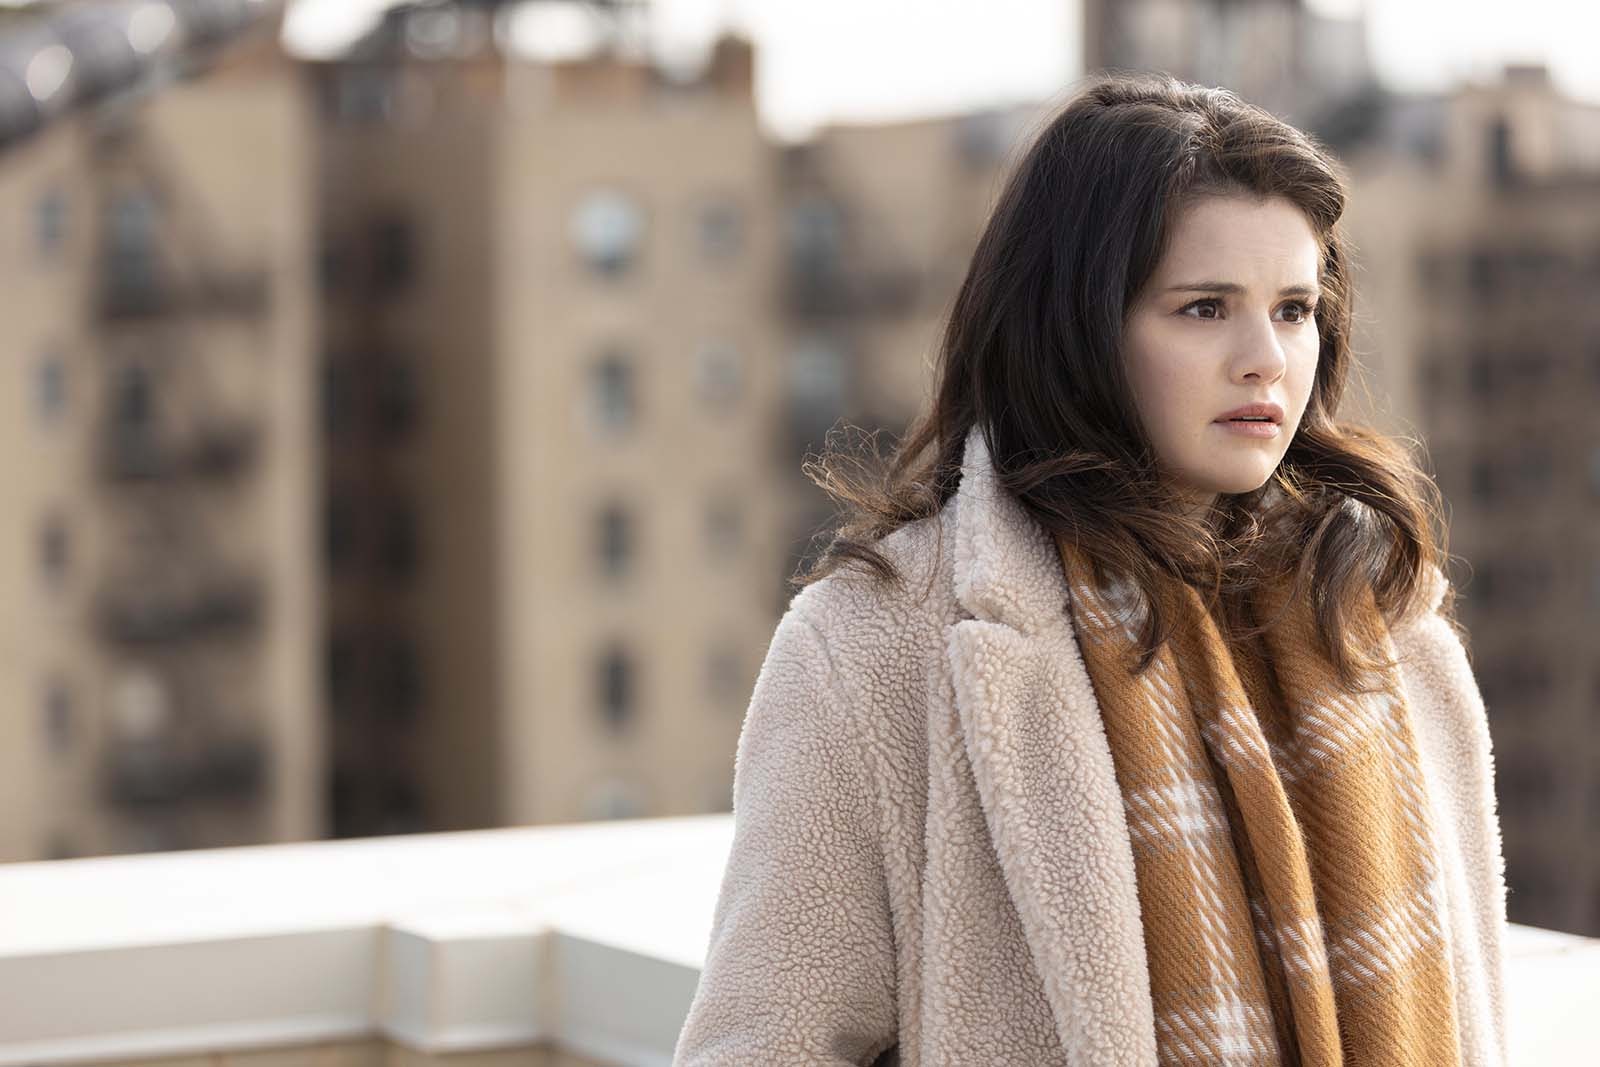 Mabel Mora (Selena Gomez) on the roof of the New York apartment building. Image © Hulu